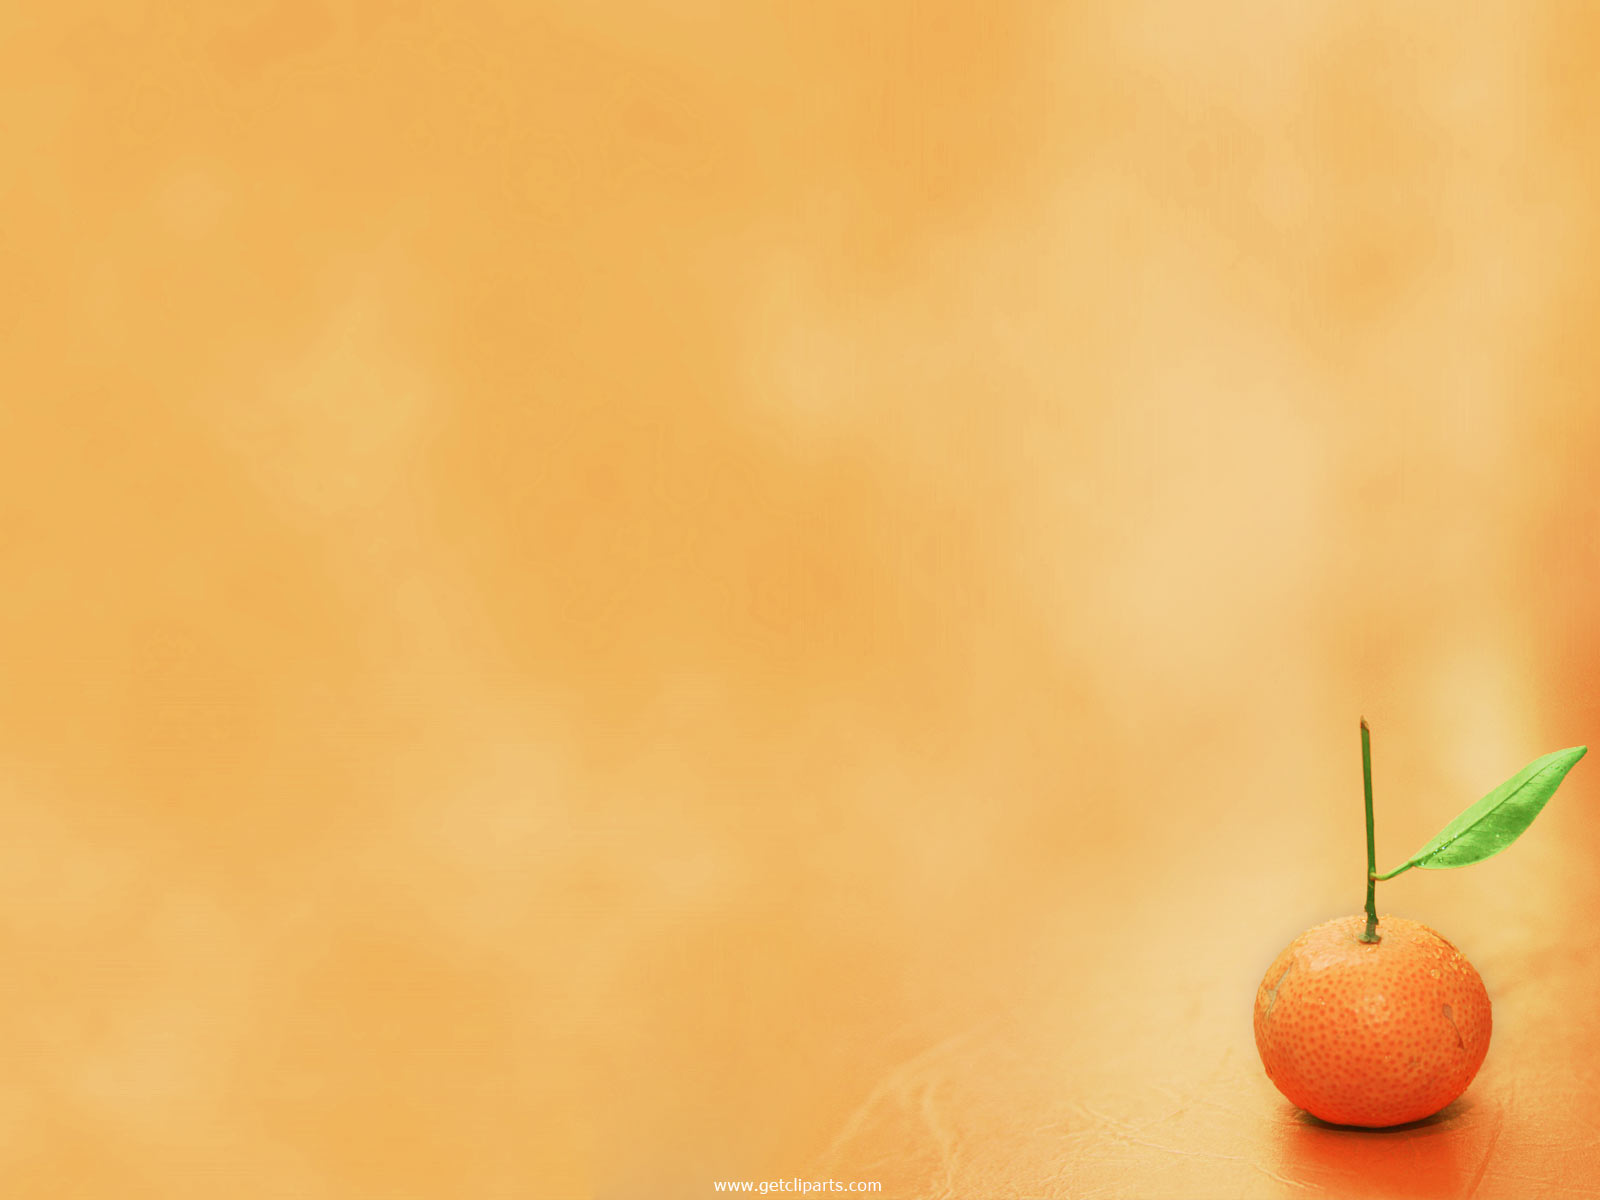  Food Fruit Backgrounds Powerpoint Wallpaper Full HD Wallpapers